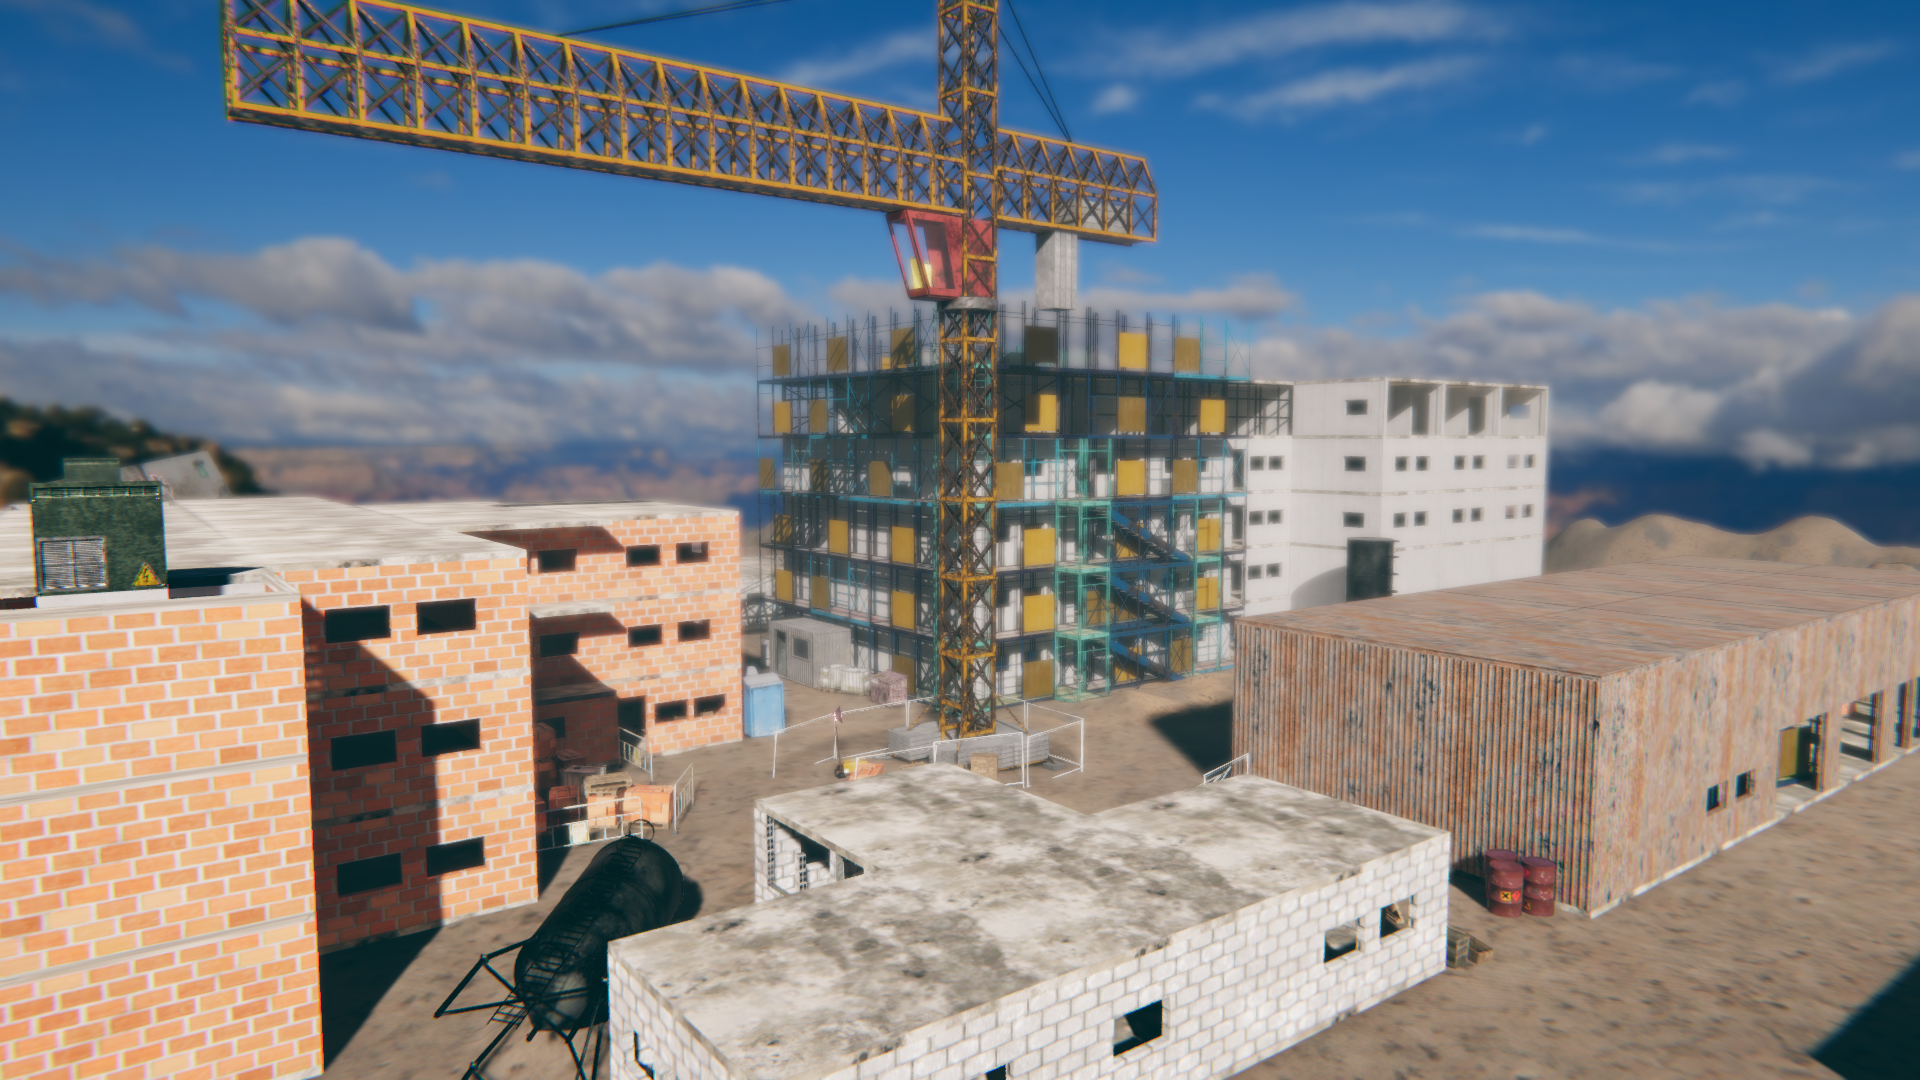 Game engines in the construction sector – what do construction and video games have in common?